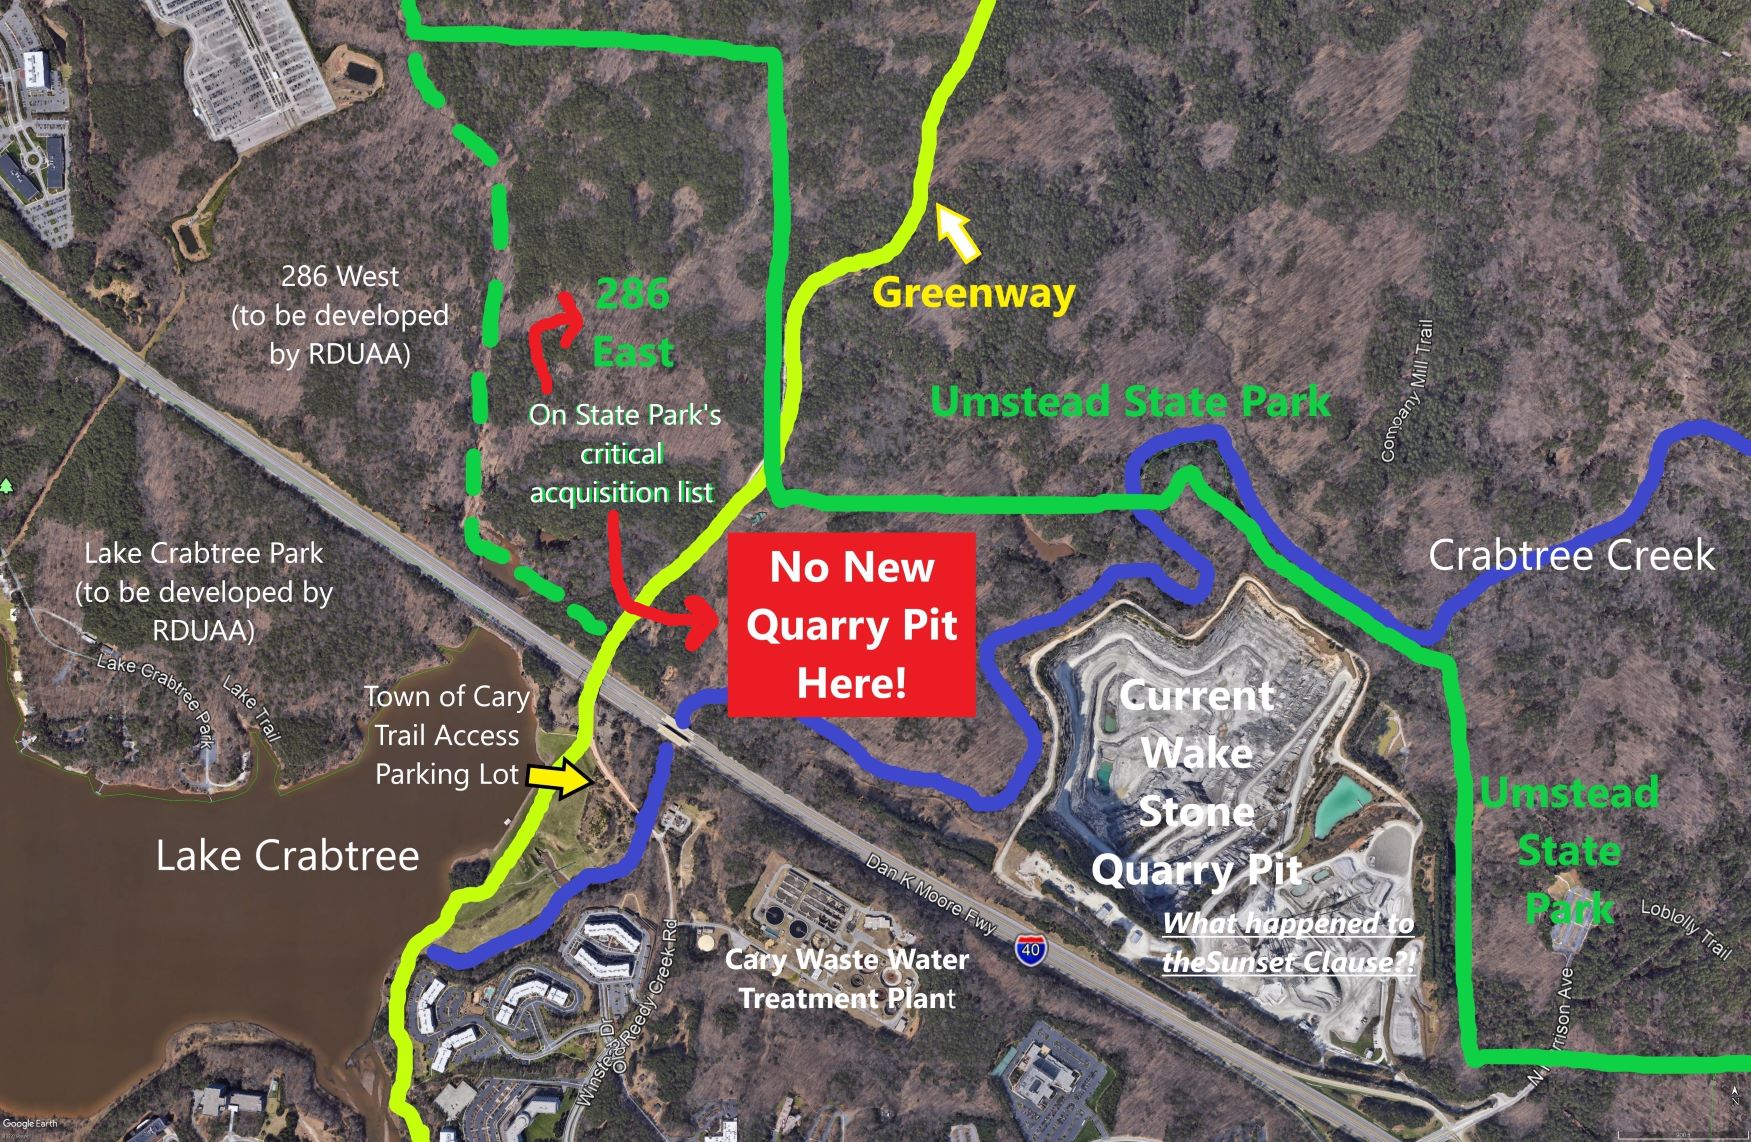 The proposed new quarry will be adjacent to William B. Umstead State Park and the East Coast Greenway.